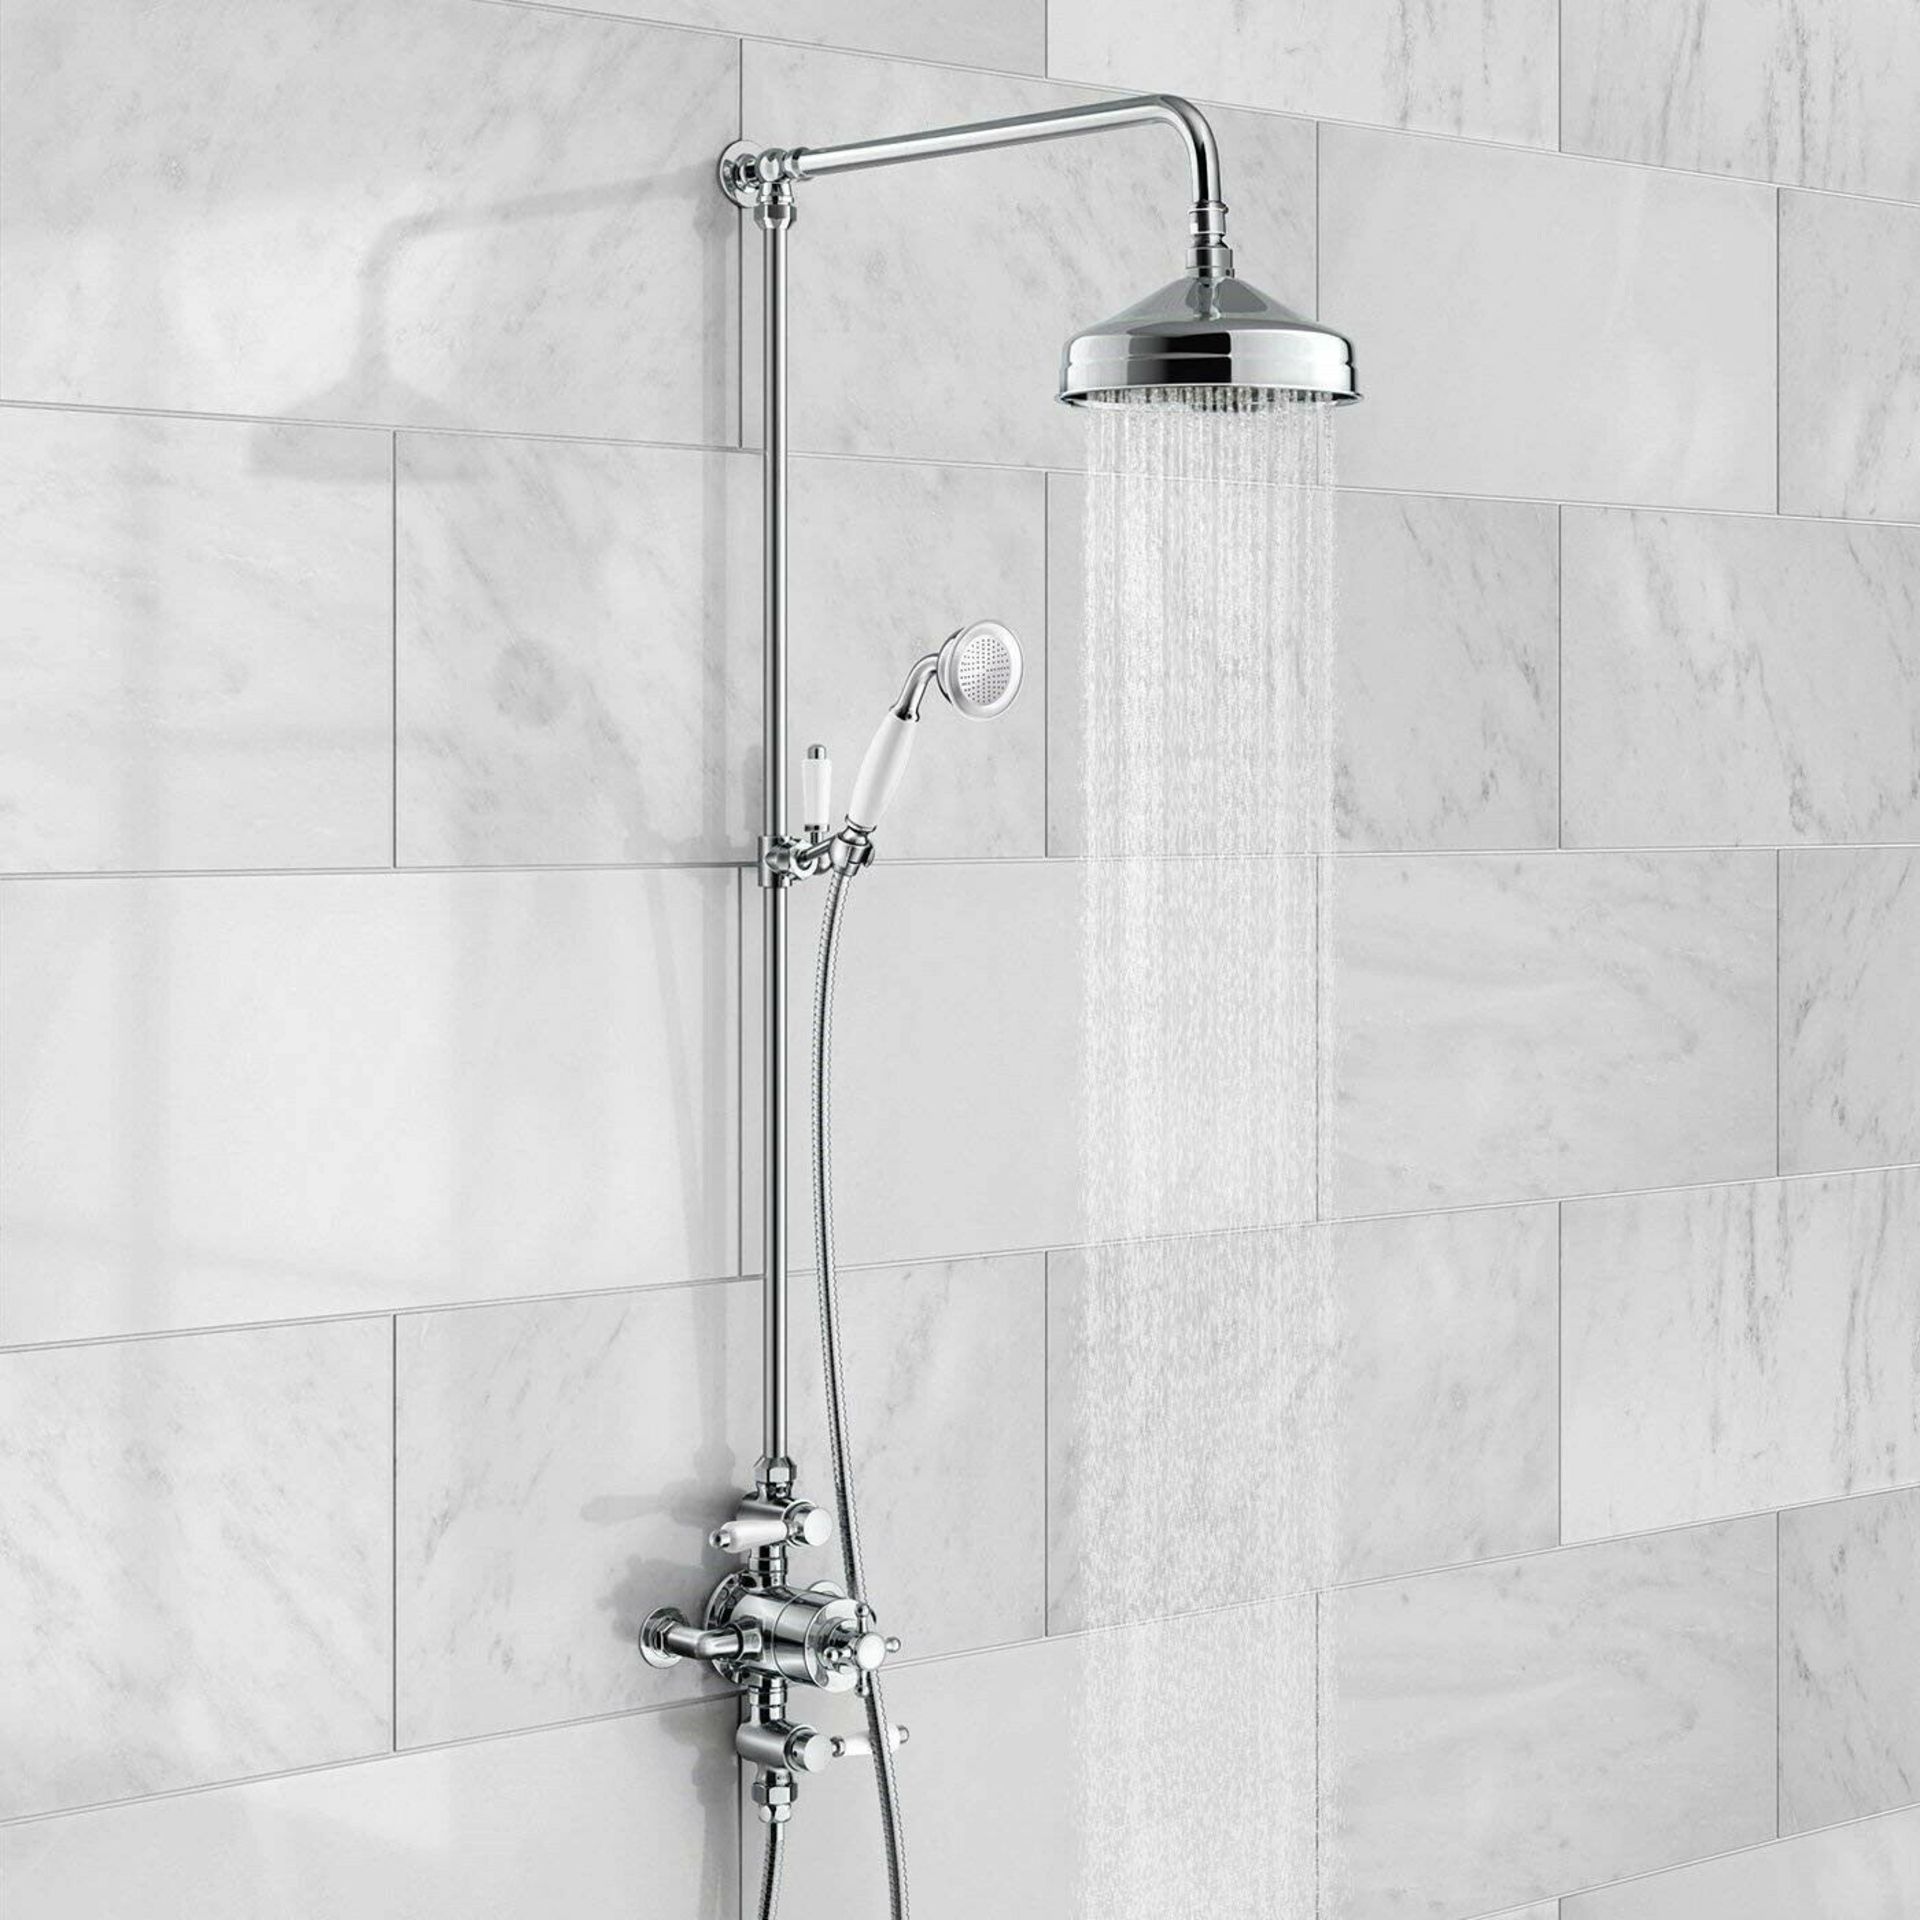 NEW (F34) Exposed Dual Traditional Thermostatic Shower Mixer + Rigid Riser + Diverter. RRP £49... - Image 3 of 3